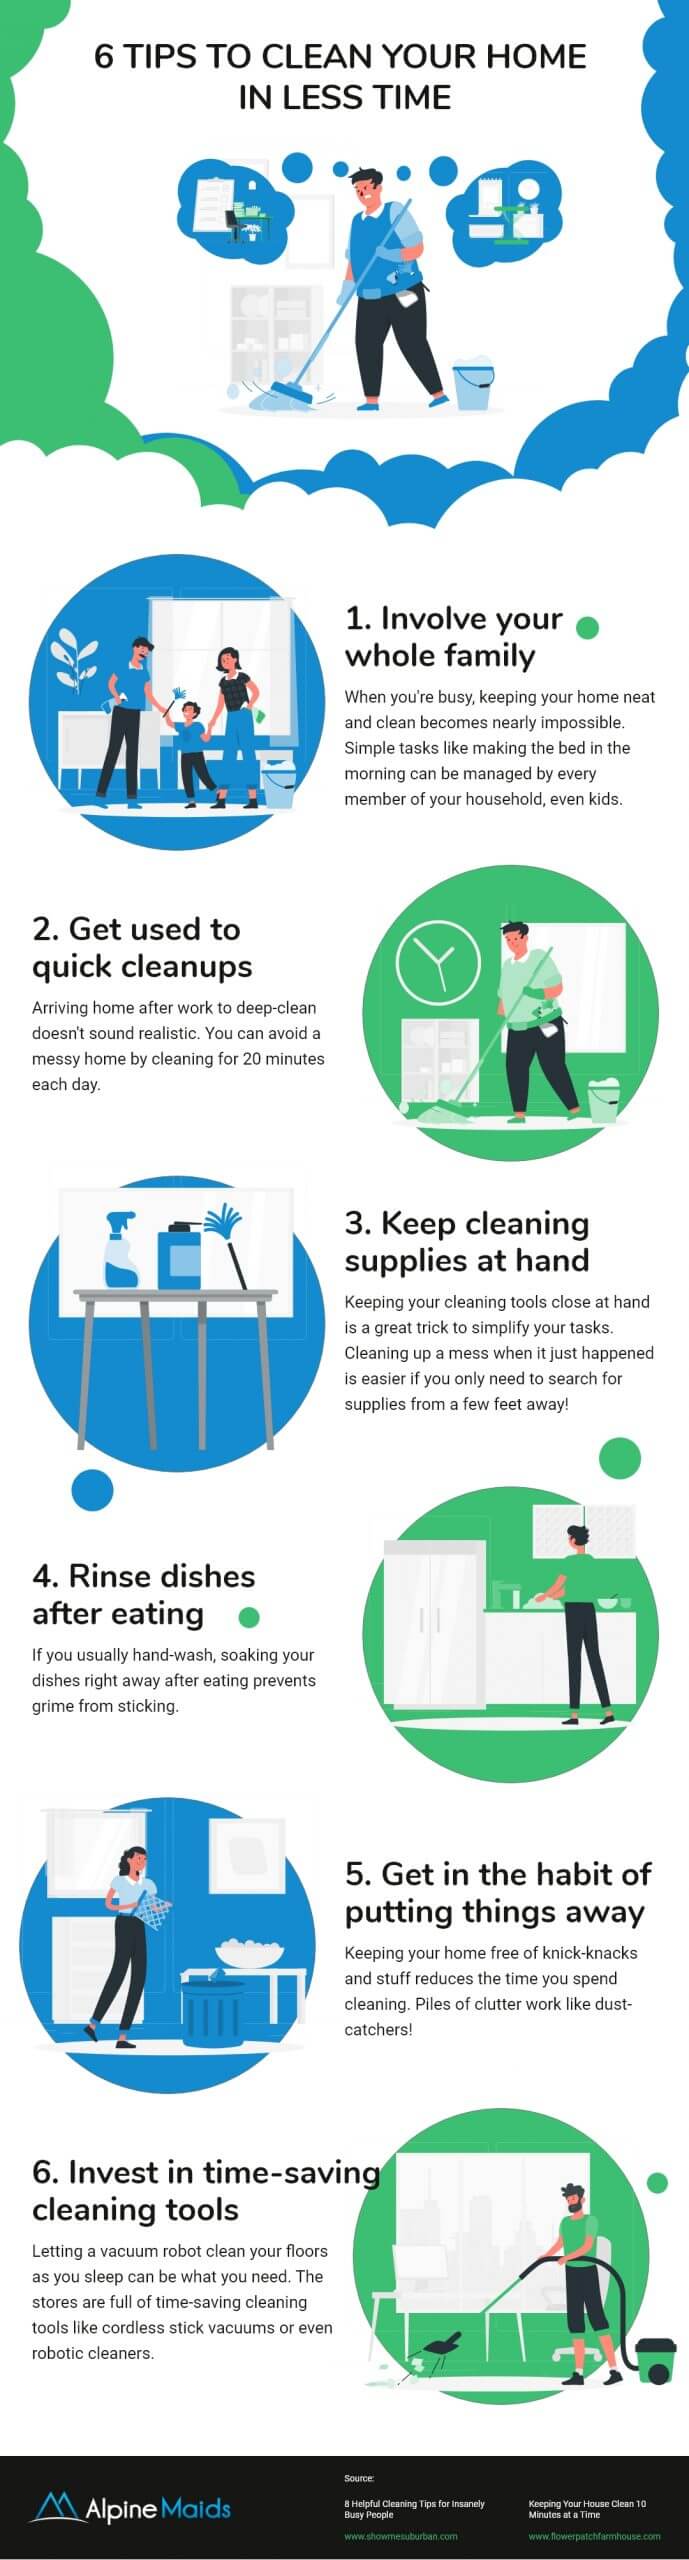 6-tips-to-clean-your-home-in-less-time